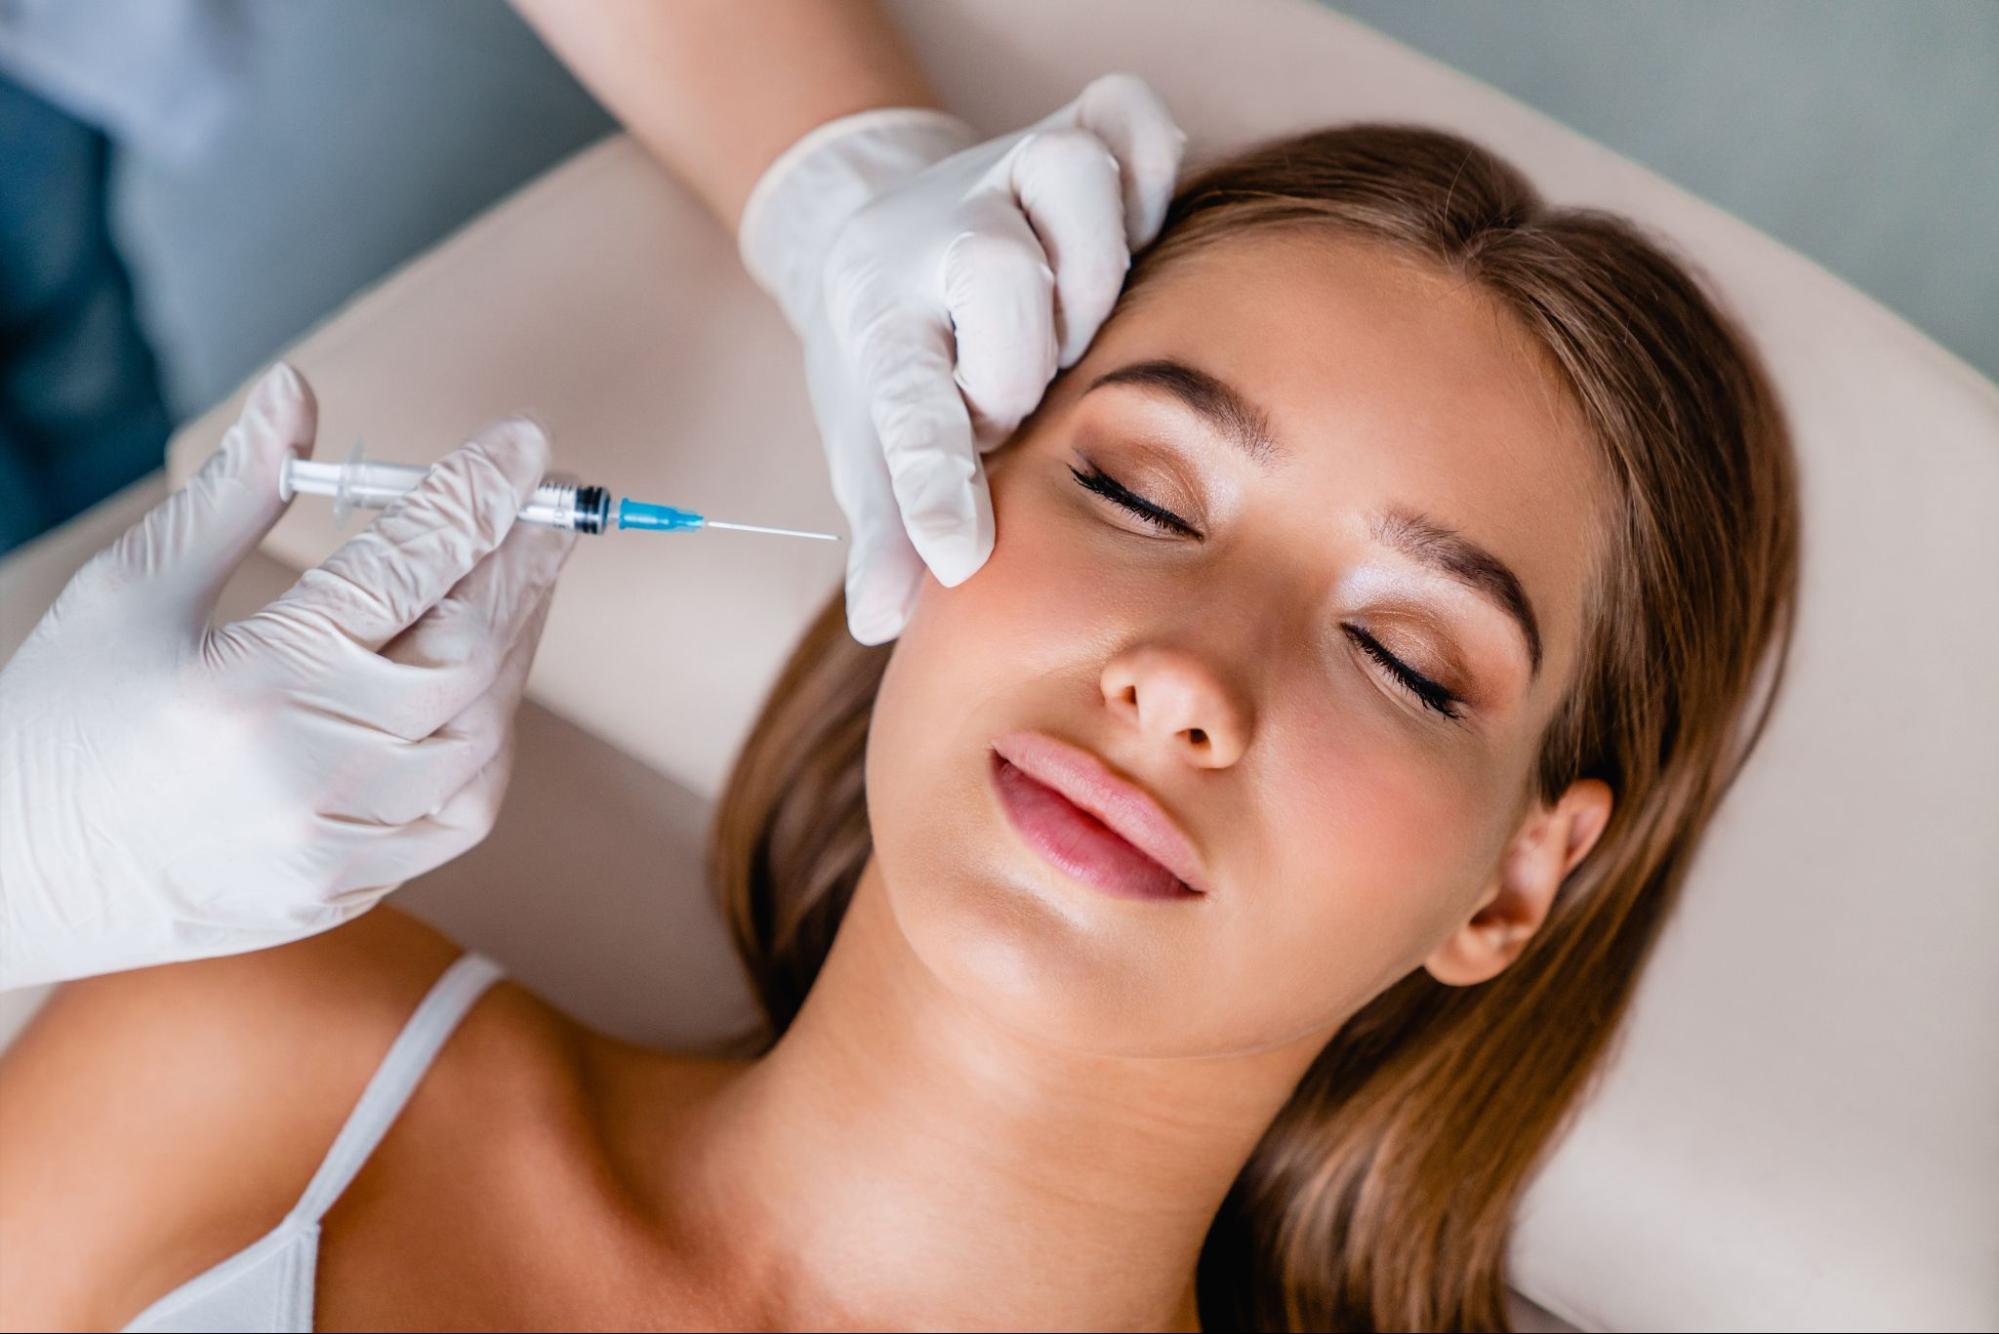 A young woman getting cosmetic injectables as a form of prejuvenation